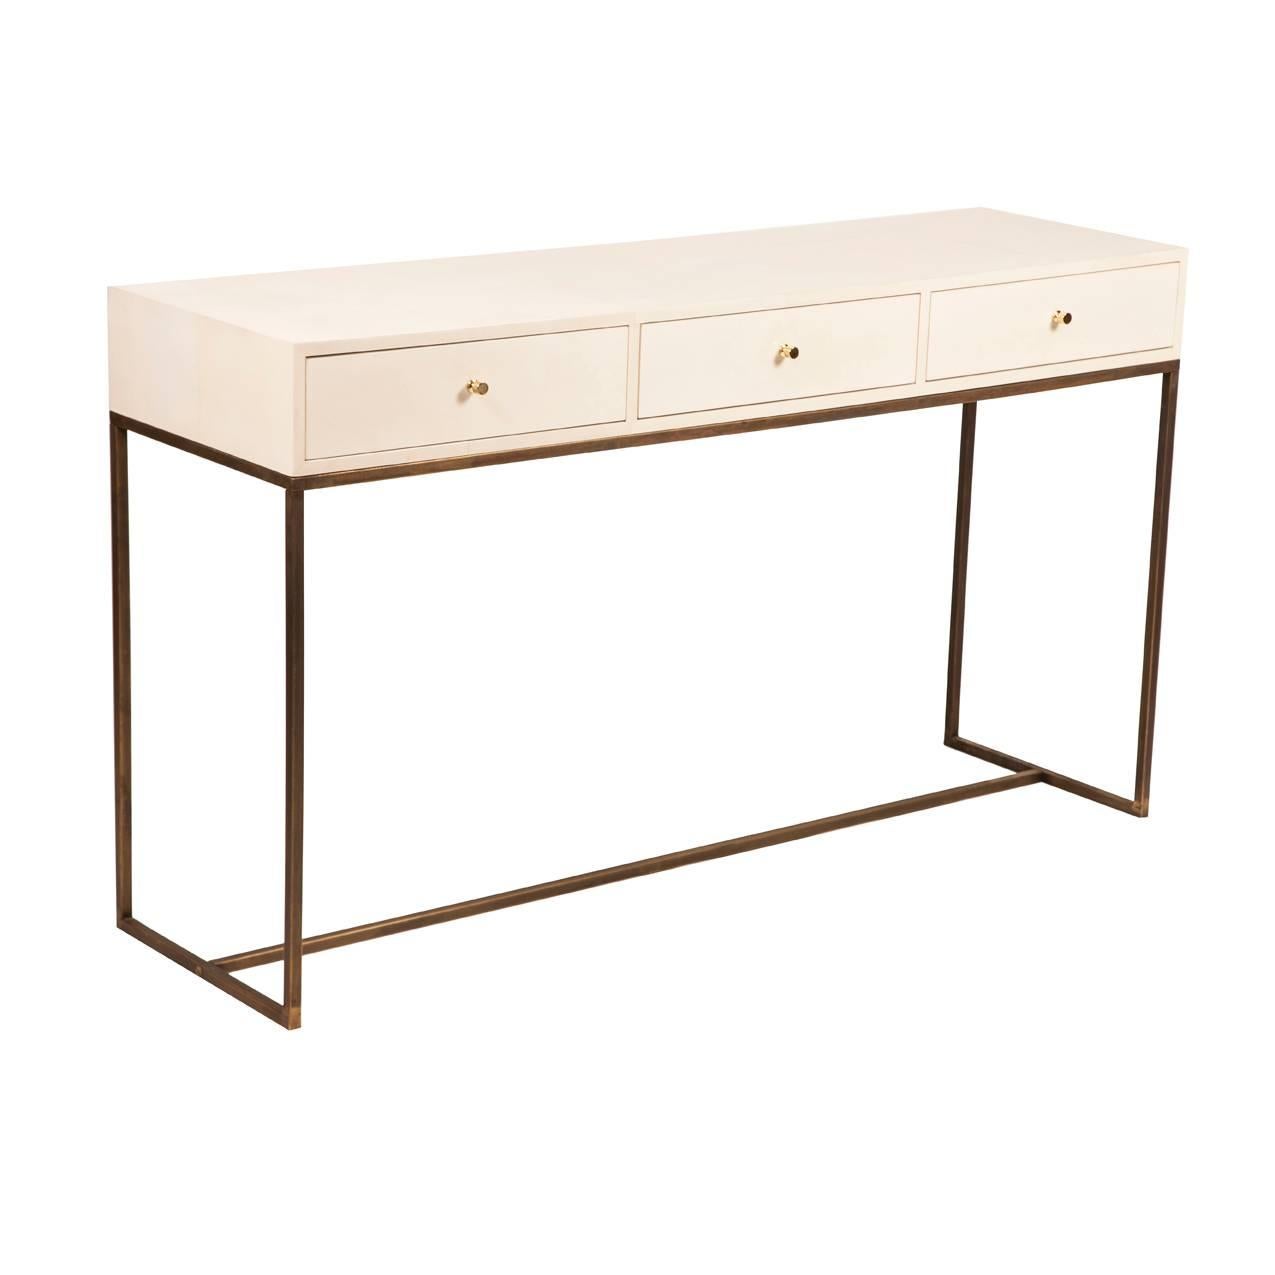 White (RAL 9001) piano lacquered console table with brass lined drawers, antique brass frame base, vellum parchment front drawer detail and brass pull knobs.

W140 x D40 x H85 cm

Lead time: 10 - 14 weeks